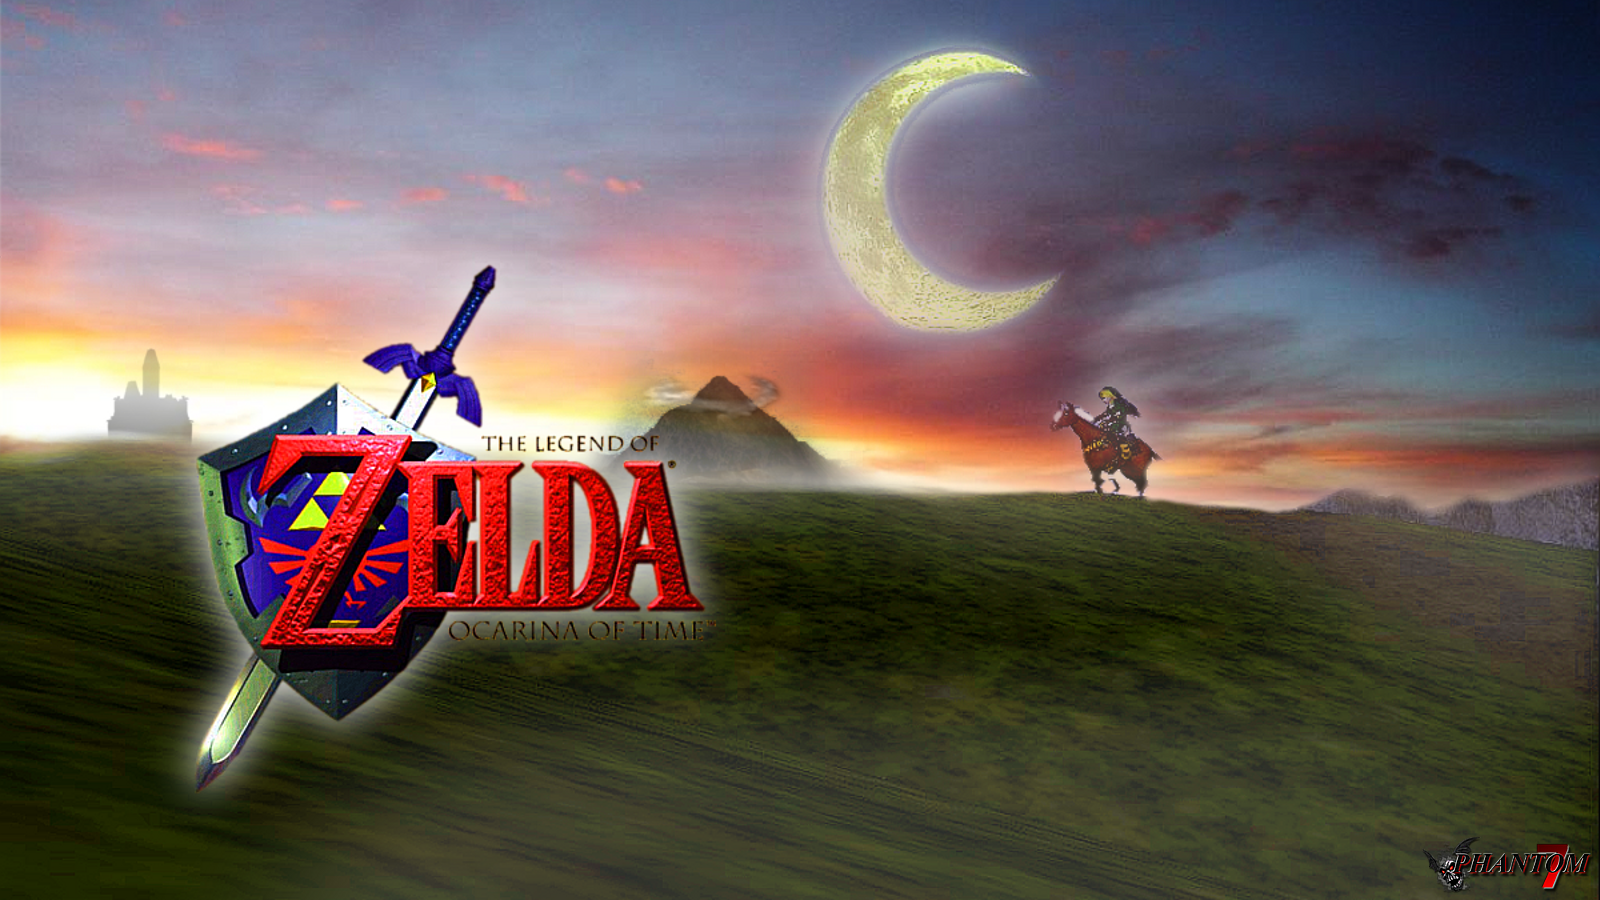 Zelda Week 2 Closer Why Tirc Never Finished Ocarina of Time The